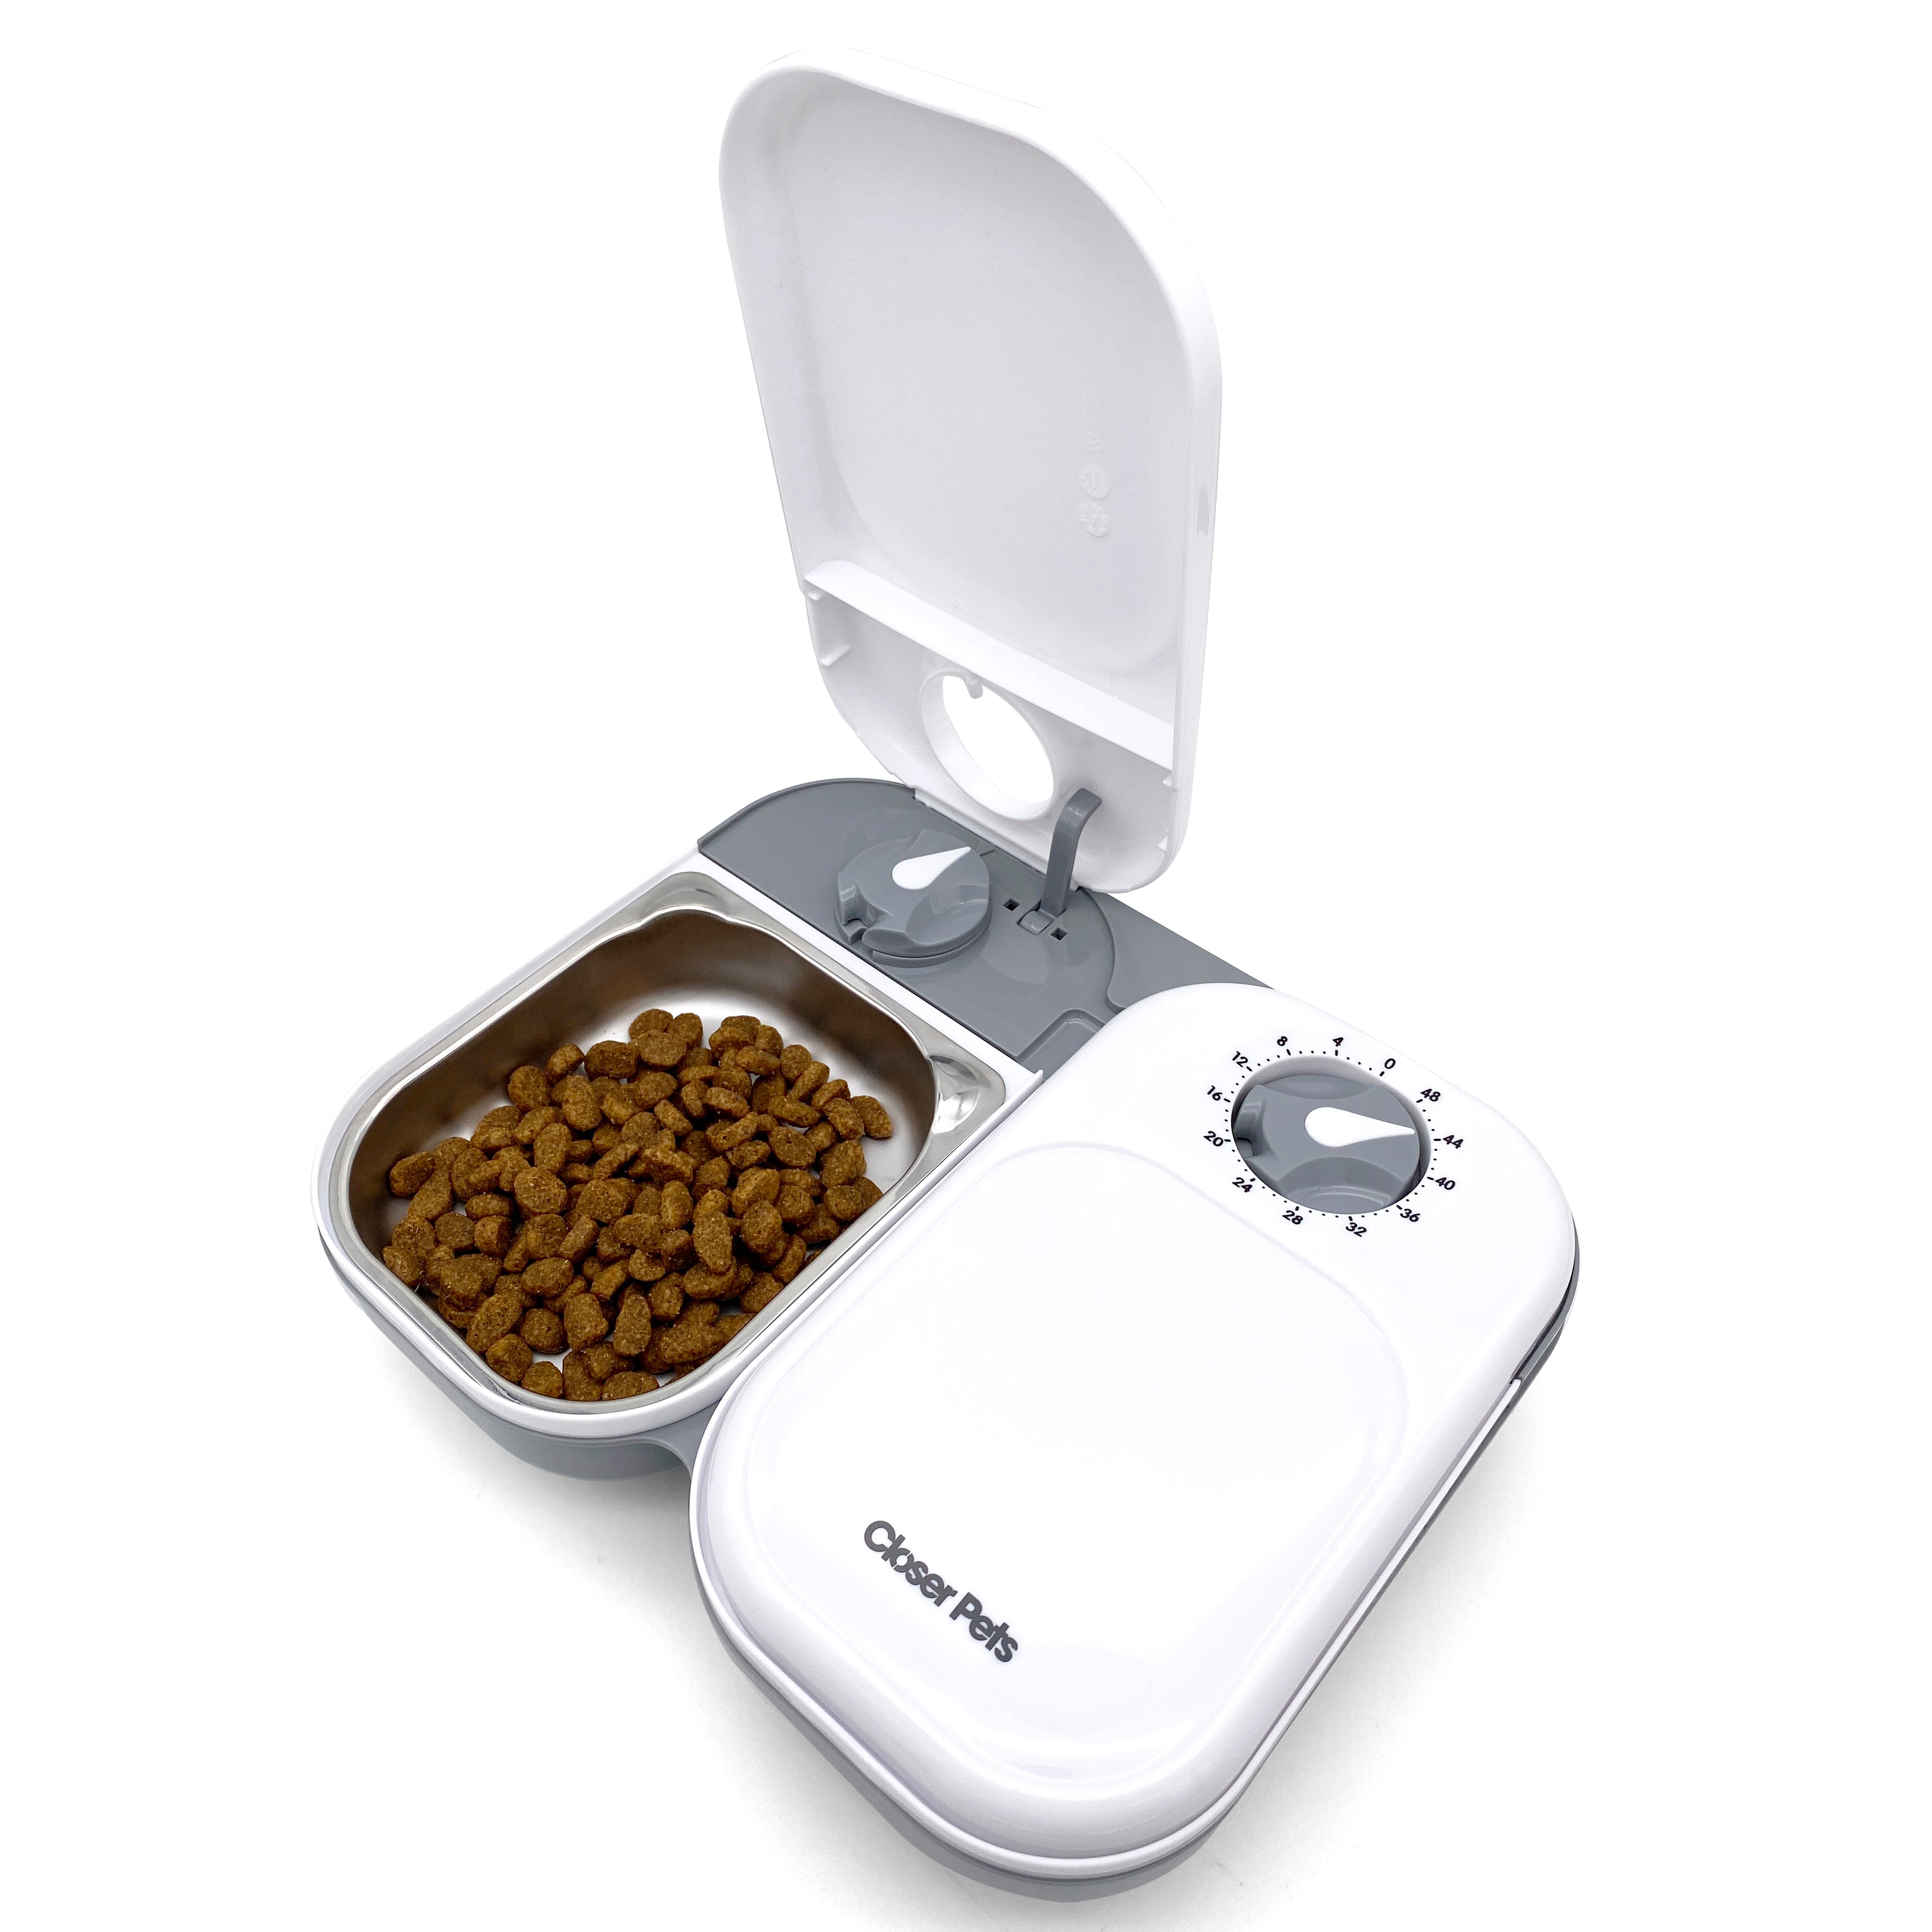 Image of Closer Pets Two-Meal Automatic Dry/Wet Food Pet Feeder with Stainless Steel Bowl Inserts (C200)